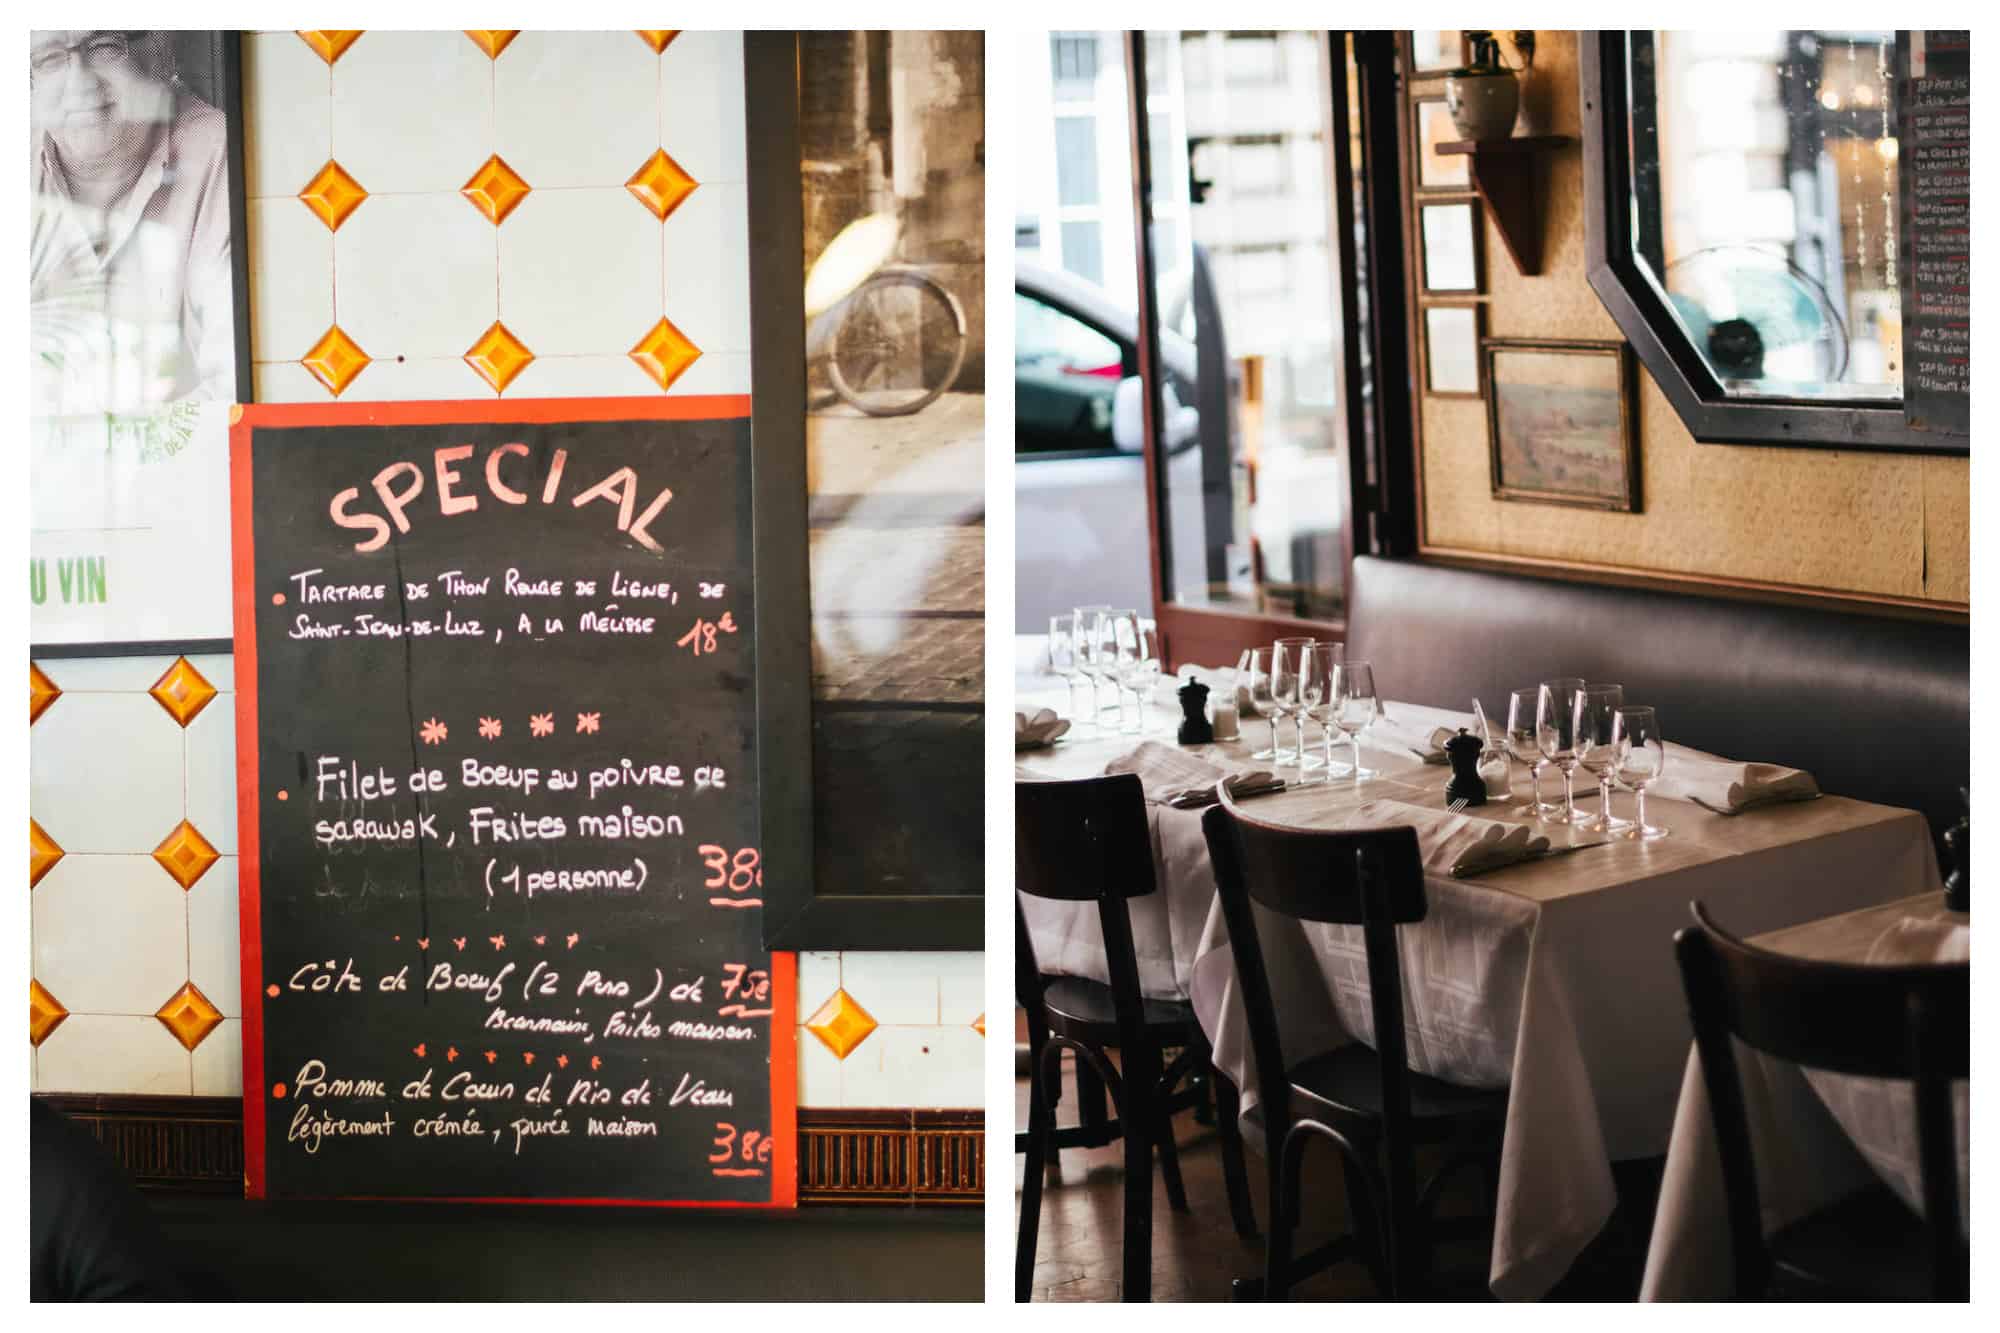 left: a chalkboard with the menu for Le Bistrot Paul Bert. right: tables with cutlery at Le Bistrot Paul Bert.